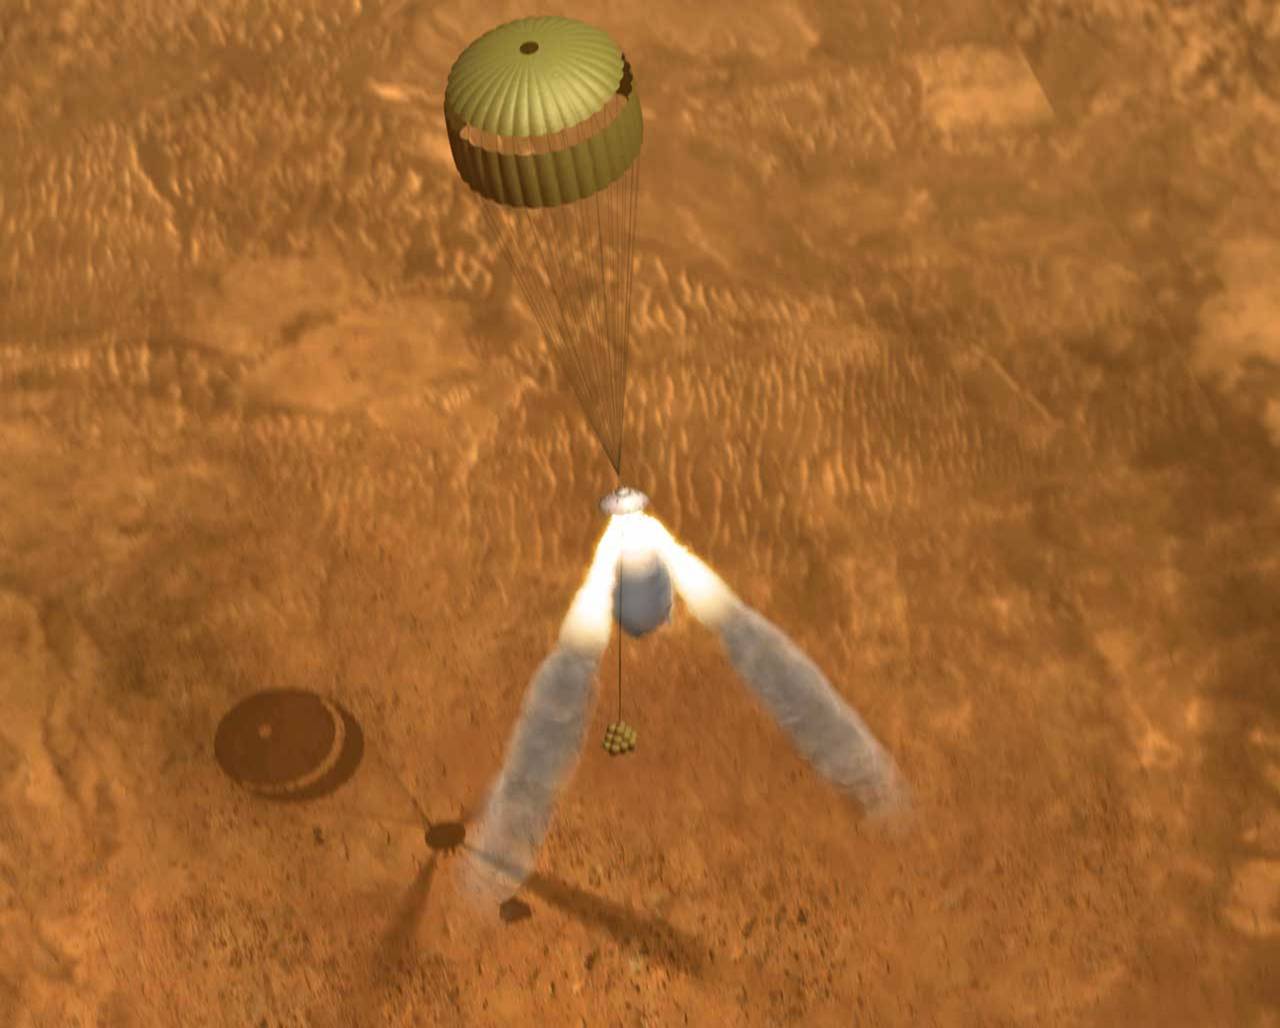 With the parachute deployed, three retrorockets fire their engines, suspending the lander 30 - 50 feet above the Martian surface.